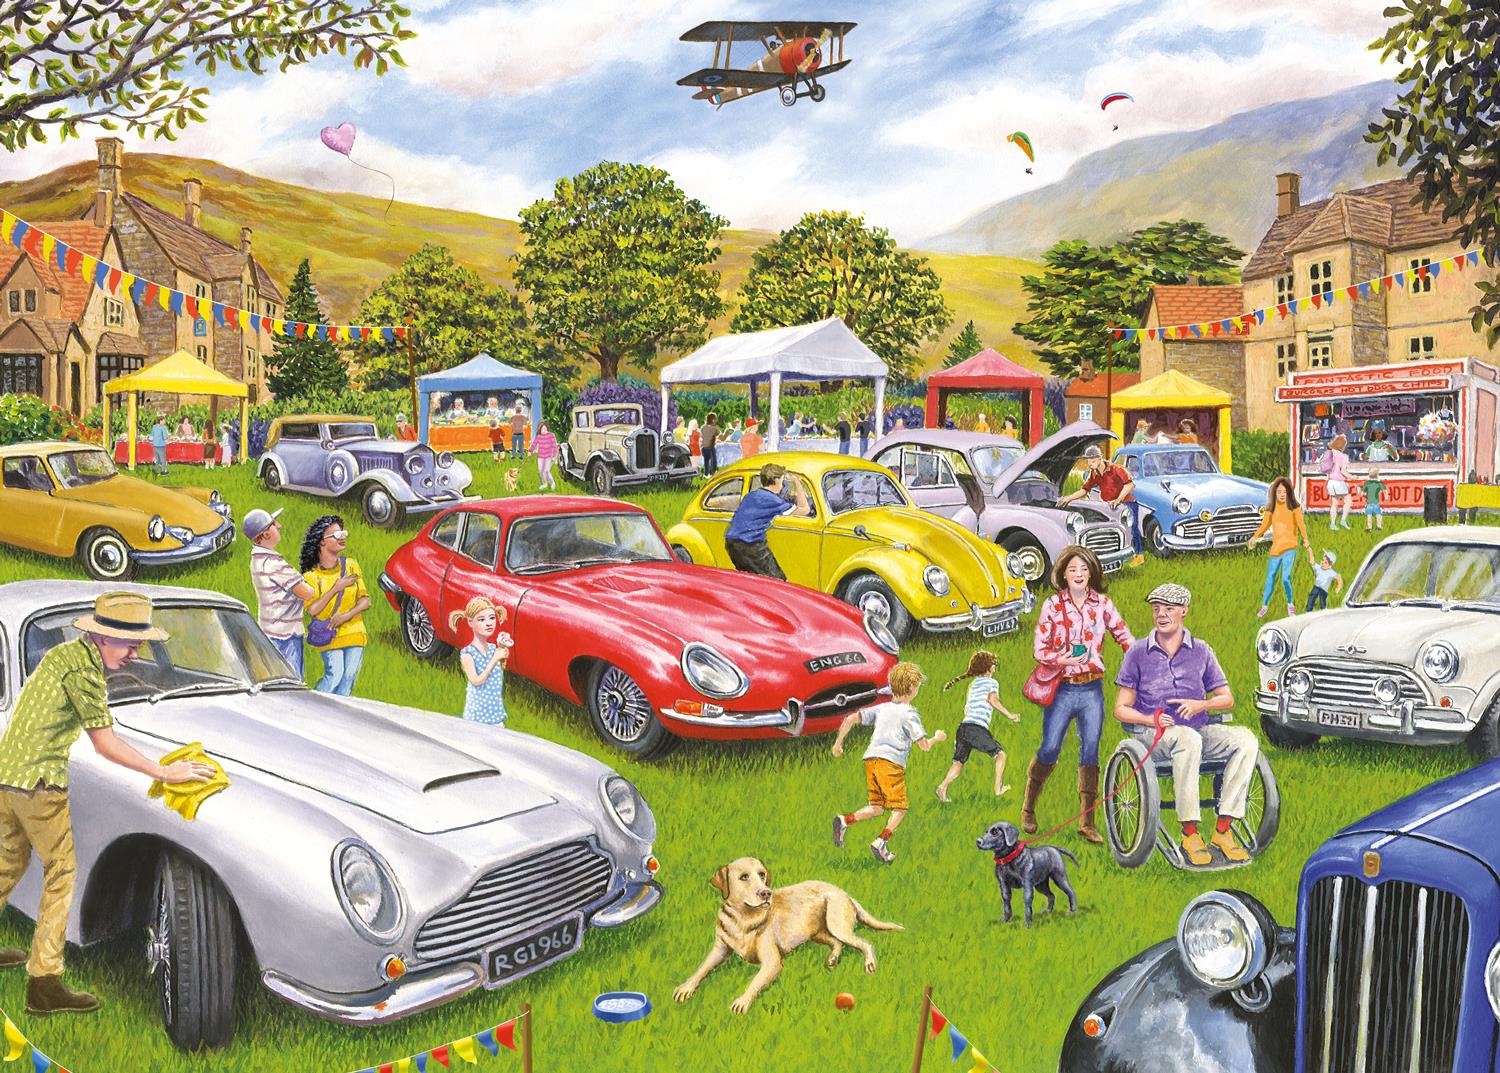 Otter House Village Motor Show Jigsaw Puzzle (1000 Pieces)